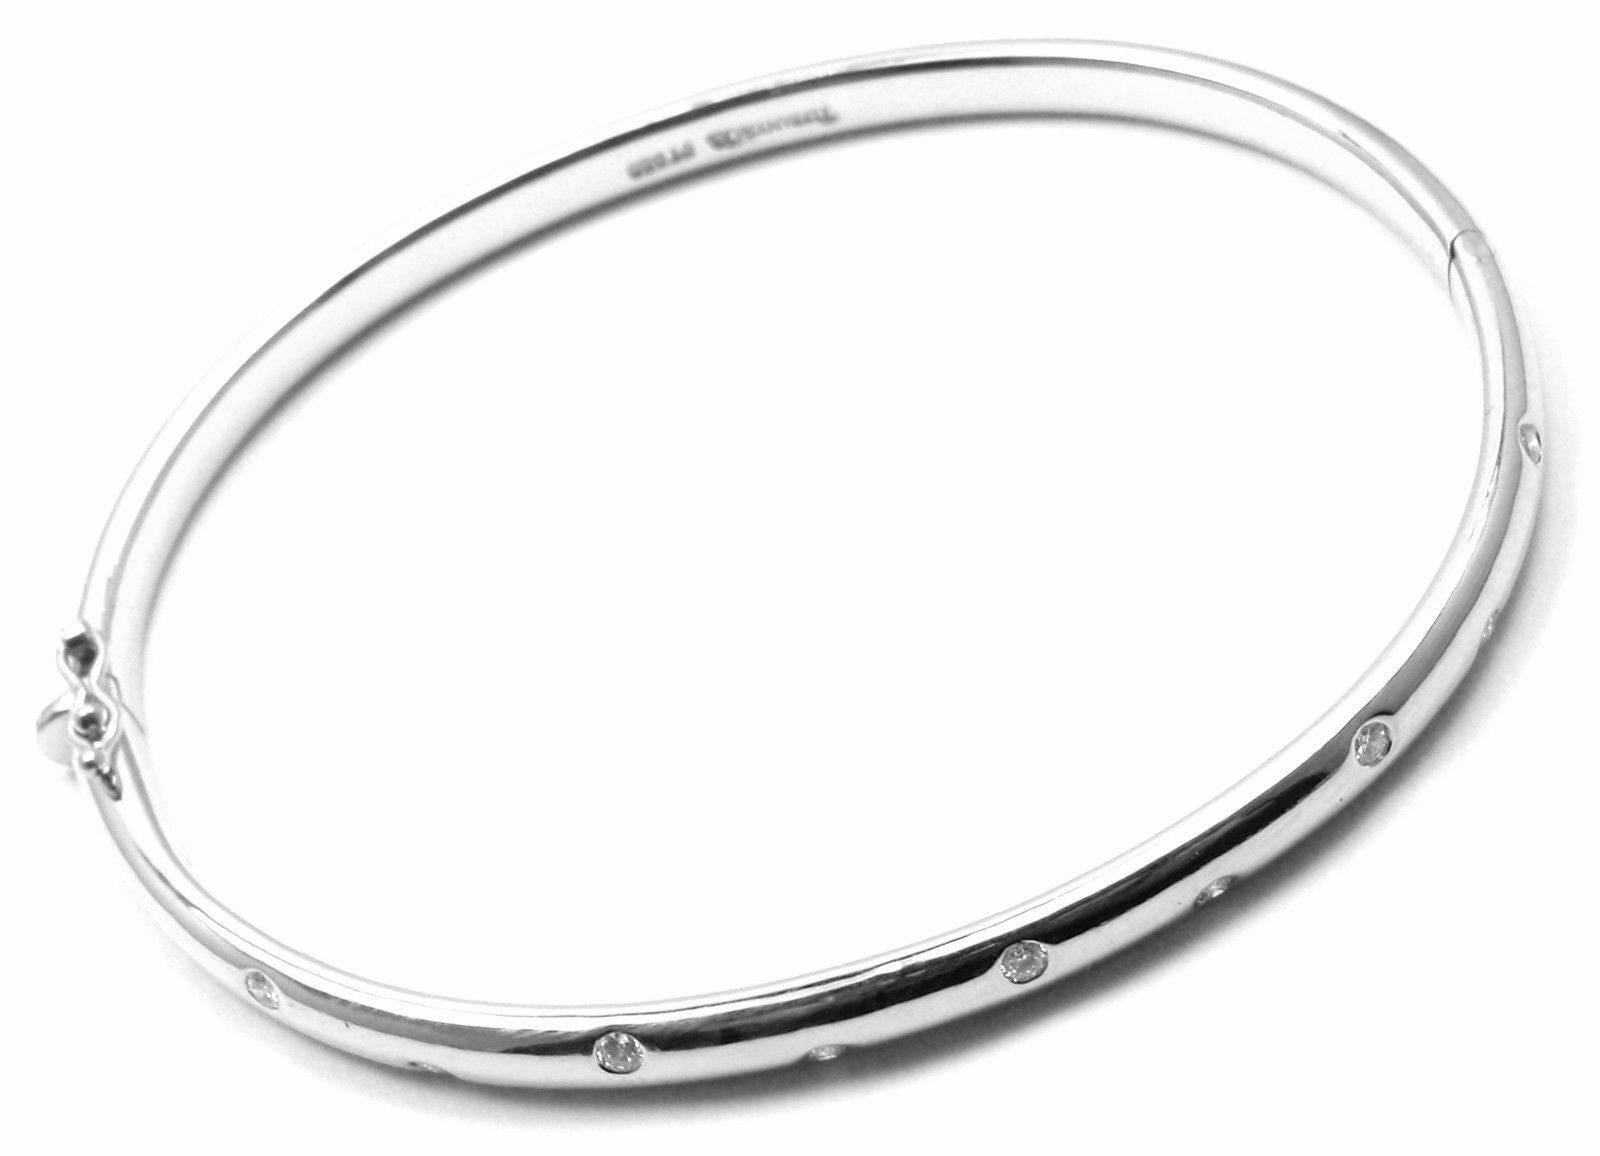 Platinum Diamond Etiole Bangle Bracelet by Tiffany & Co.  
With 10 round brilliant cut diamonds VS1 clarity, E color total weight 
approx. .30ct

Details:  
Weight: 36.3 grams
Length: 6 3/4